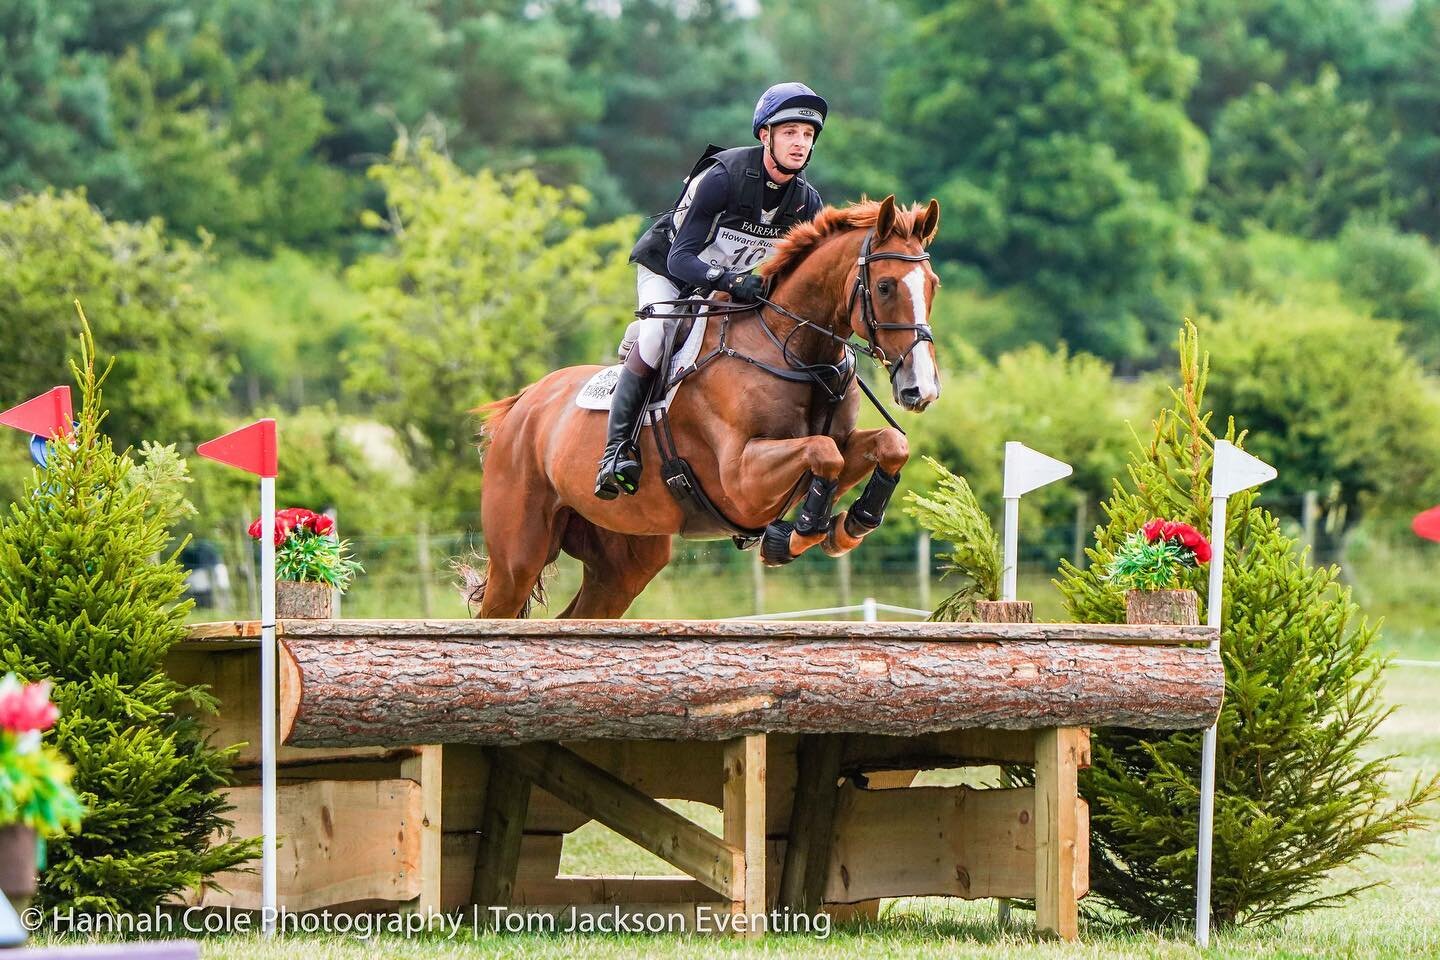 We have a selection of intermediate/3* horses available for sale. All very competitive horses and have good records. Please get in touch if your looking for your next superstar! 

#eventhorsesforsale #eventinghorseforsale #hannahcolephotography